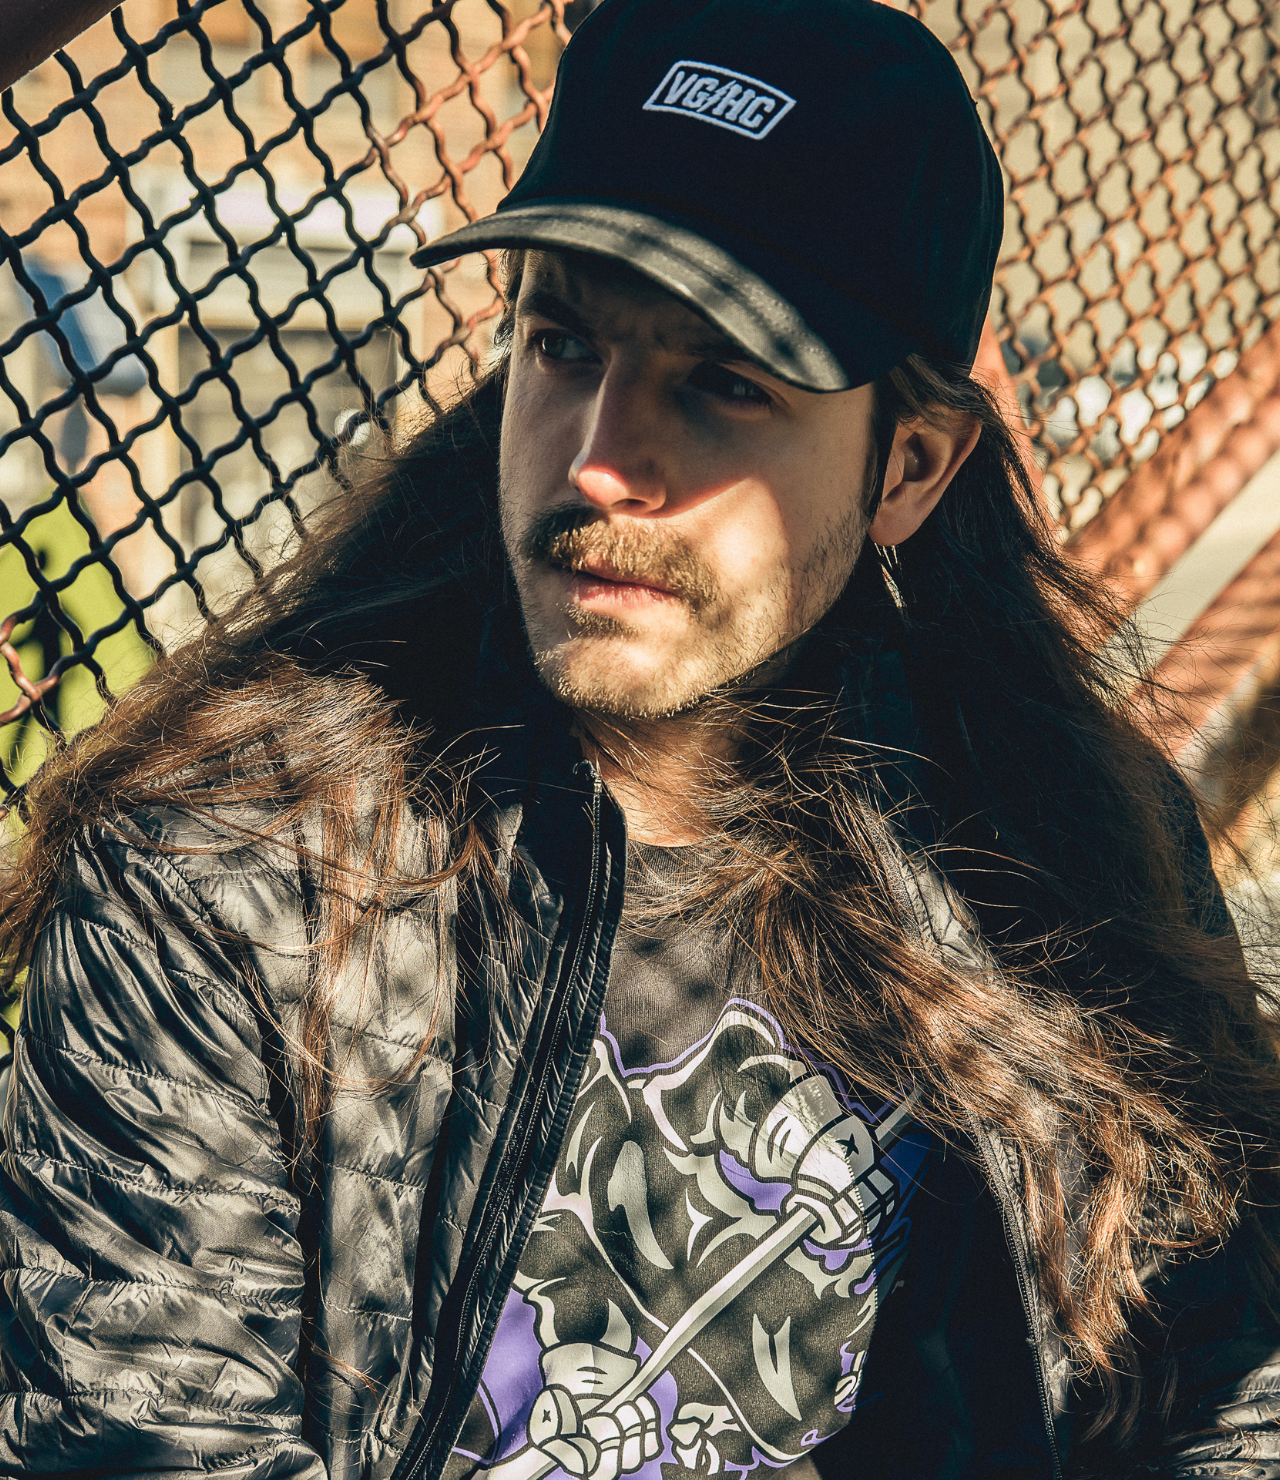 Delseyfly metoparis hockey clothing company new releases built by hockey fans for hockey fans in ROMA, CA. Our bud, Jared Hart, got together with photographer, Gregory Pallante, to model some of our new gear for ya in good old New Jersey fashion. 